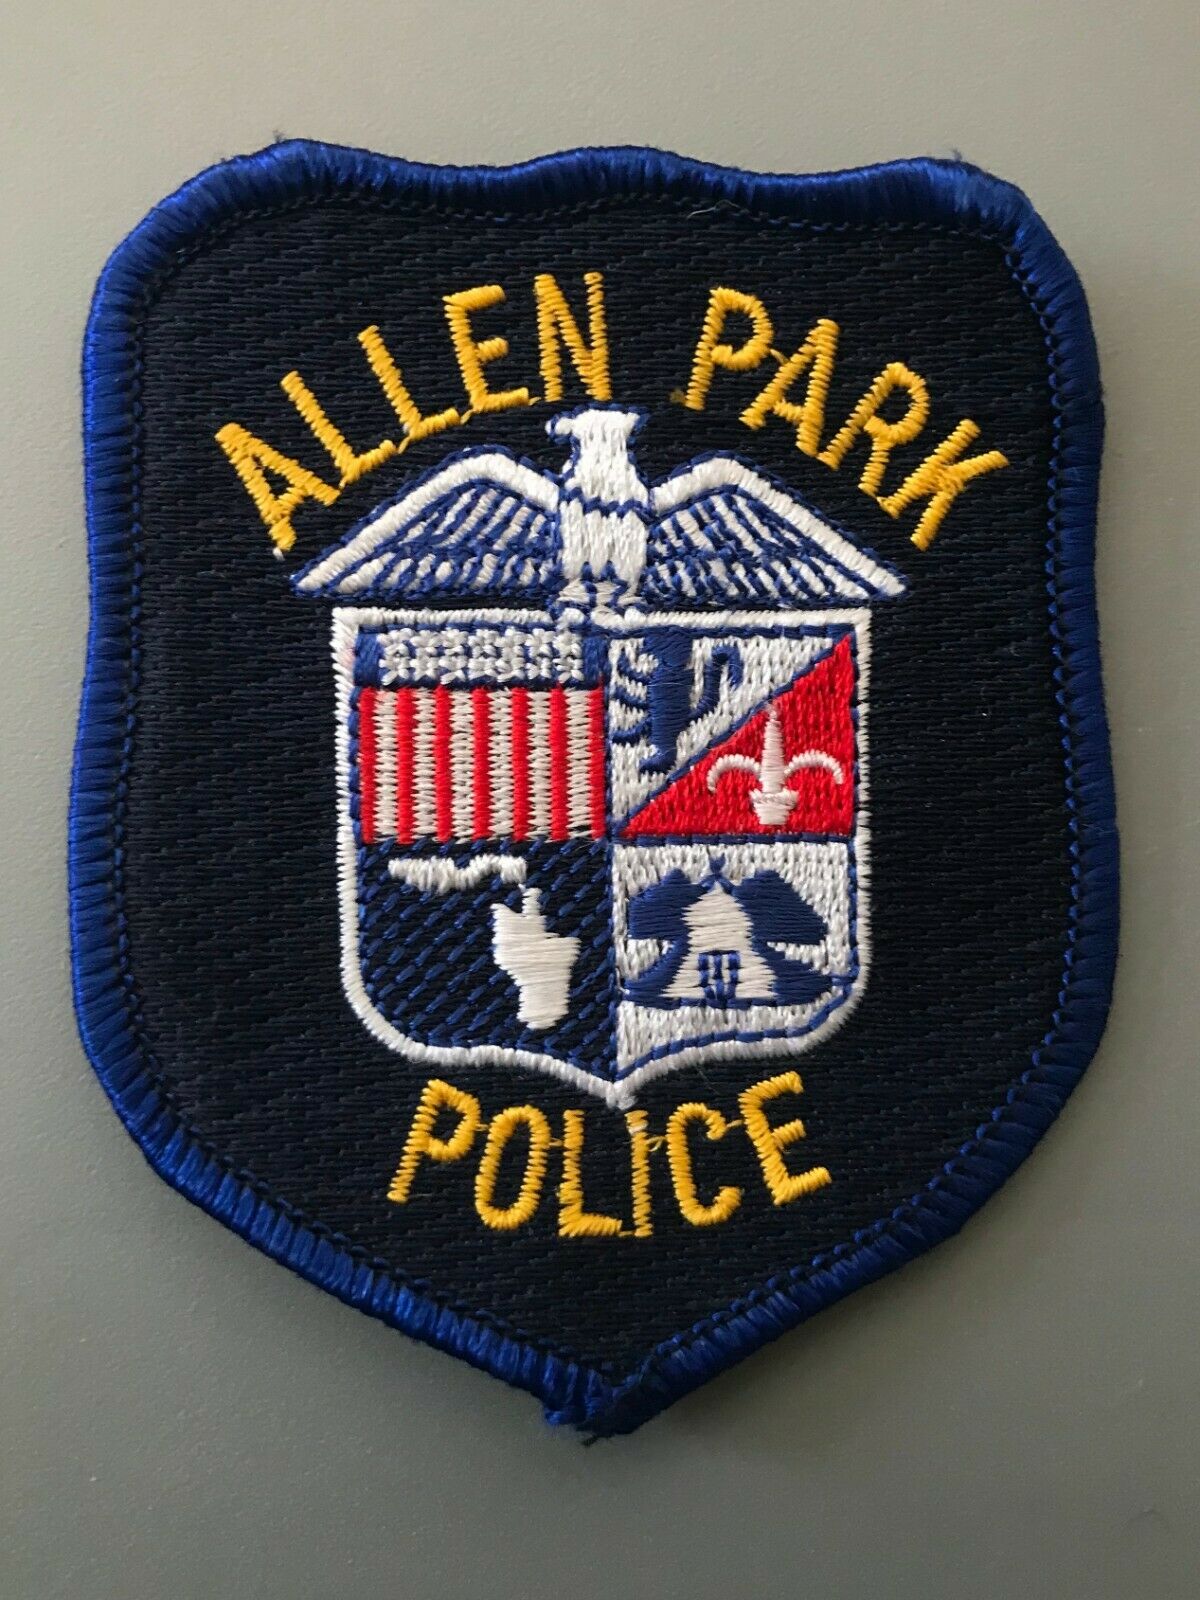 Michigan State Police Patch Allen Park Police